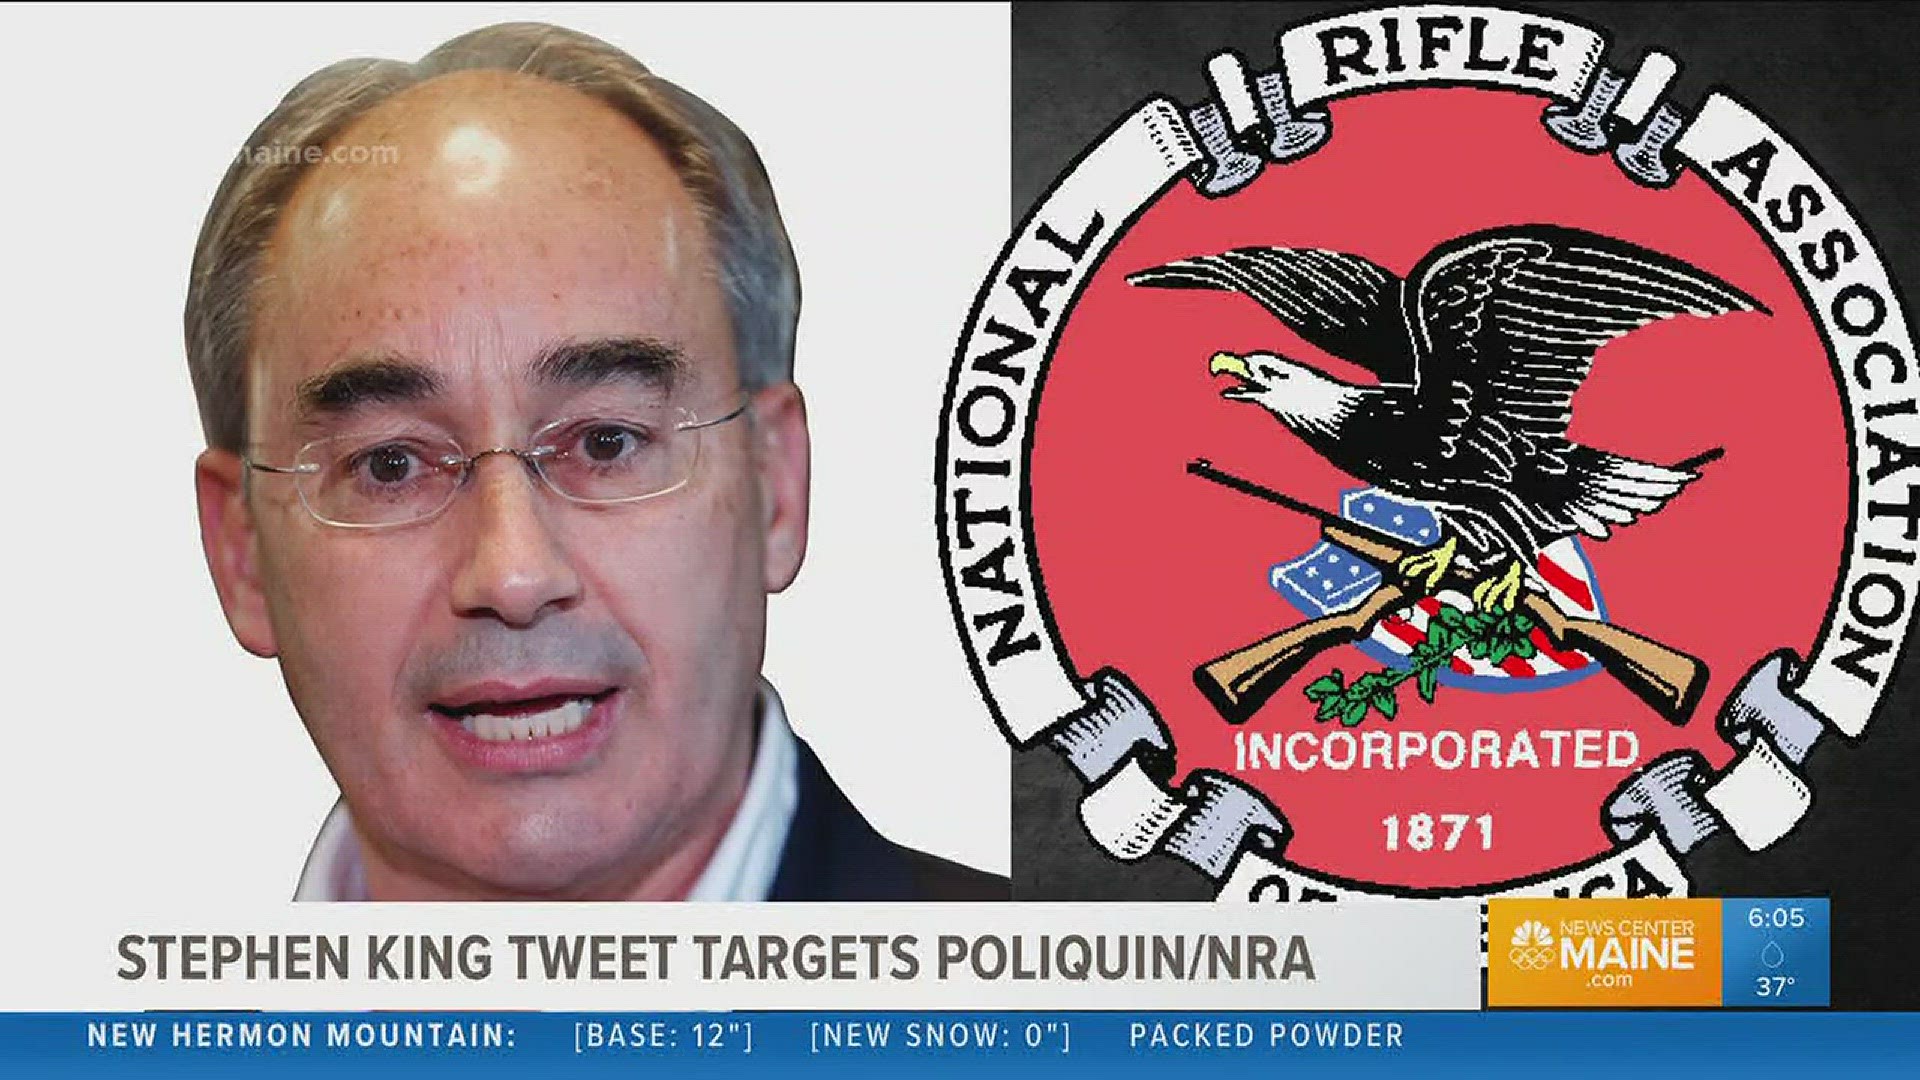 Stephen King tweet target Poliquin and his ties to the NRA